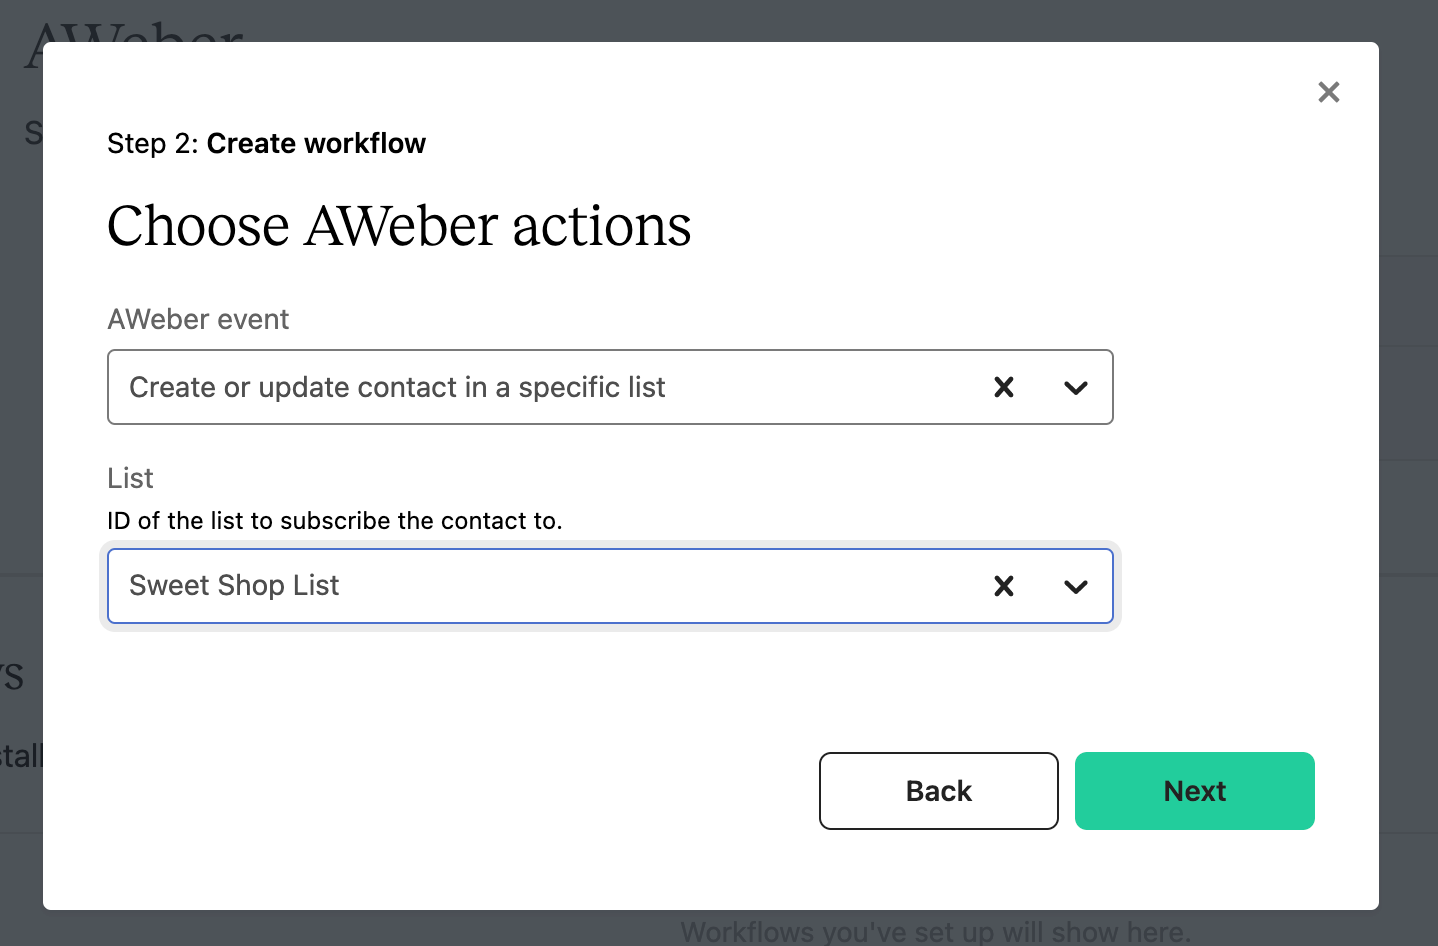 aweber_workflow_step_2_list.png